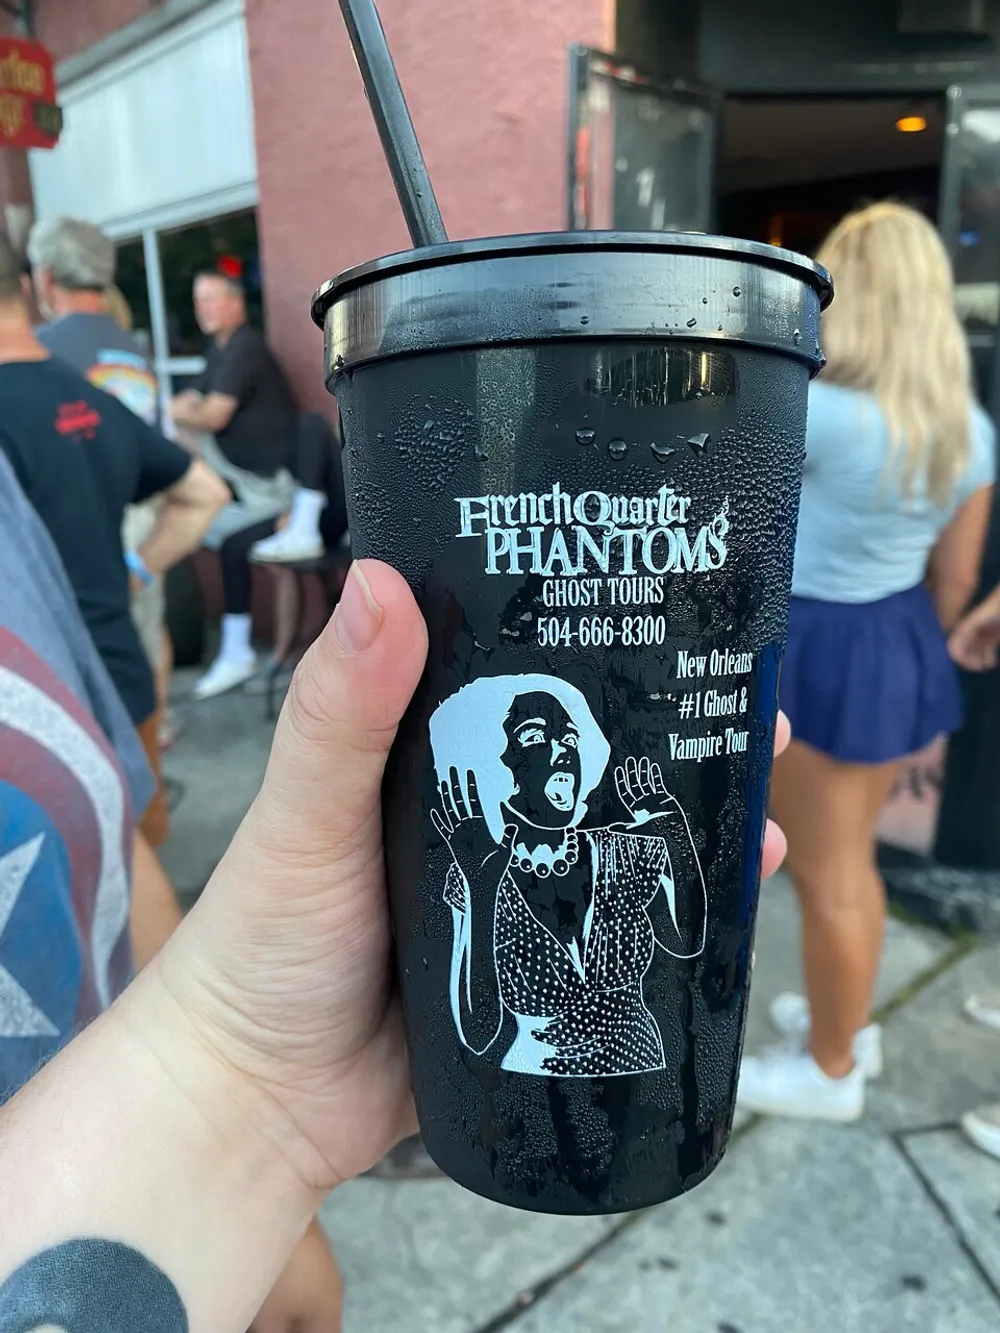 A person is holding a black cup with the French Quarter Phantoms Ghost Tours logo and contact information featuring a graphic of a distressed woman in front of a blurred street scene